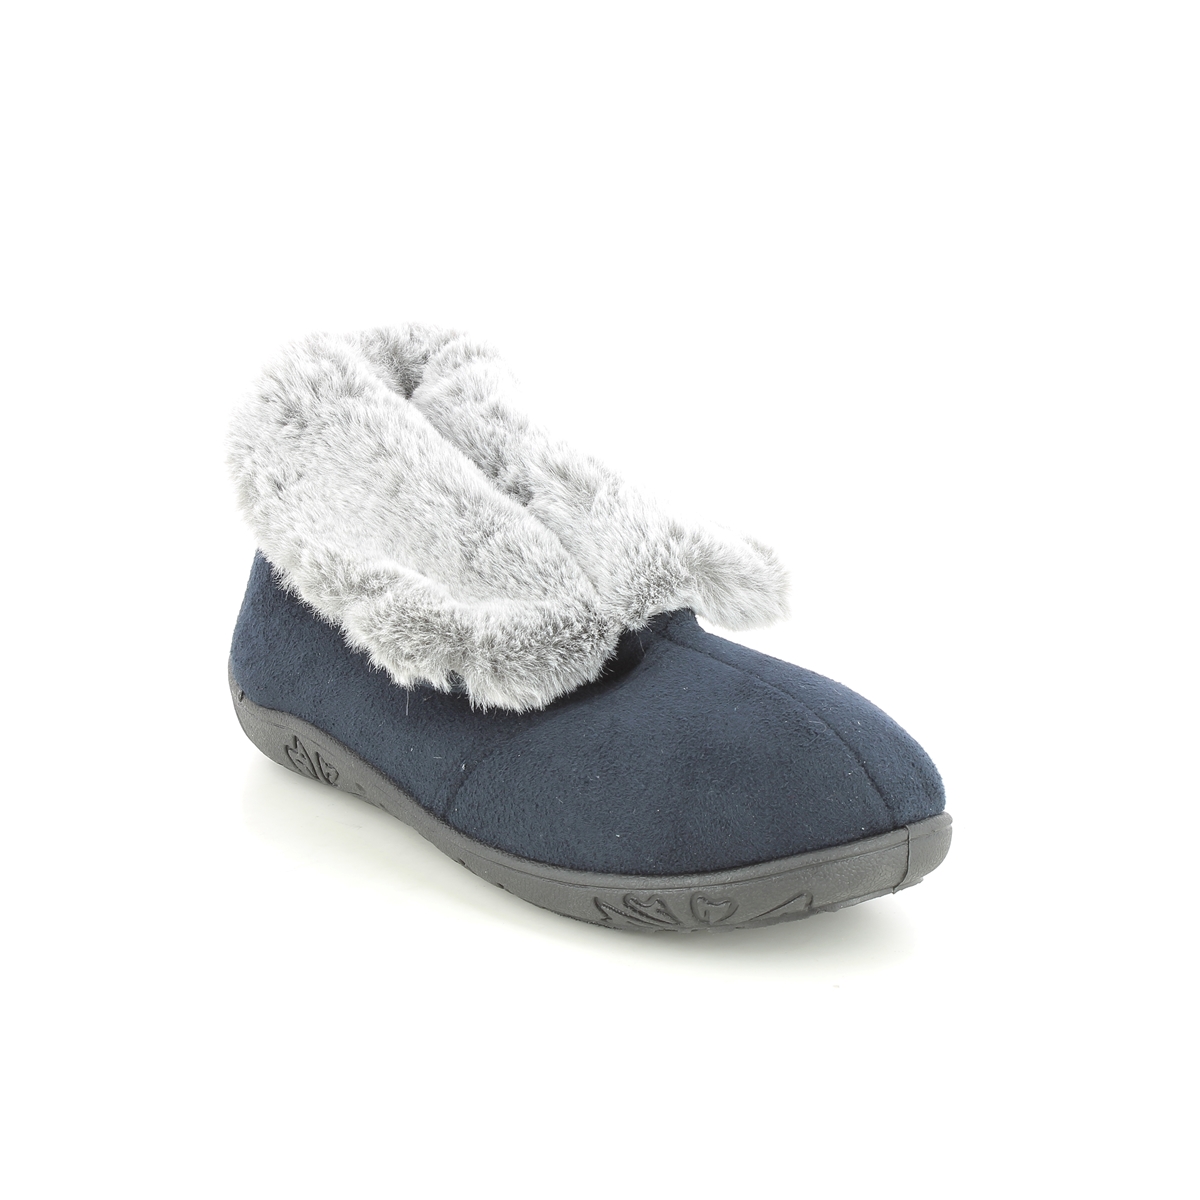 Padders Esme  Ee Fit Navy Womens slippers 4050-4007 in a Plain Textile in Size 7